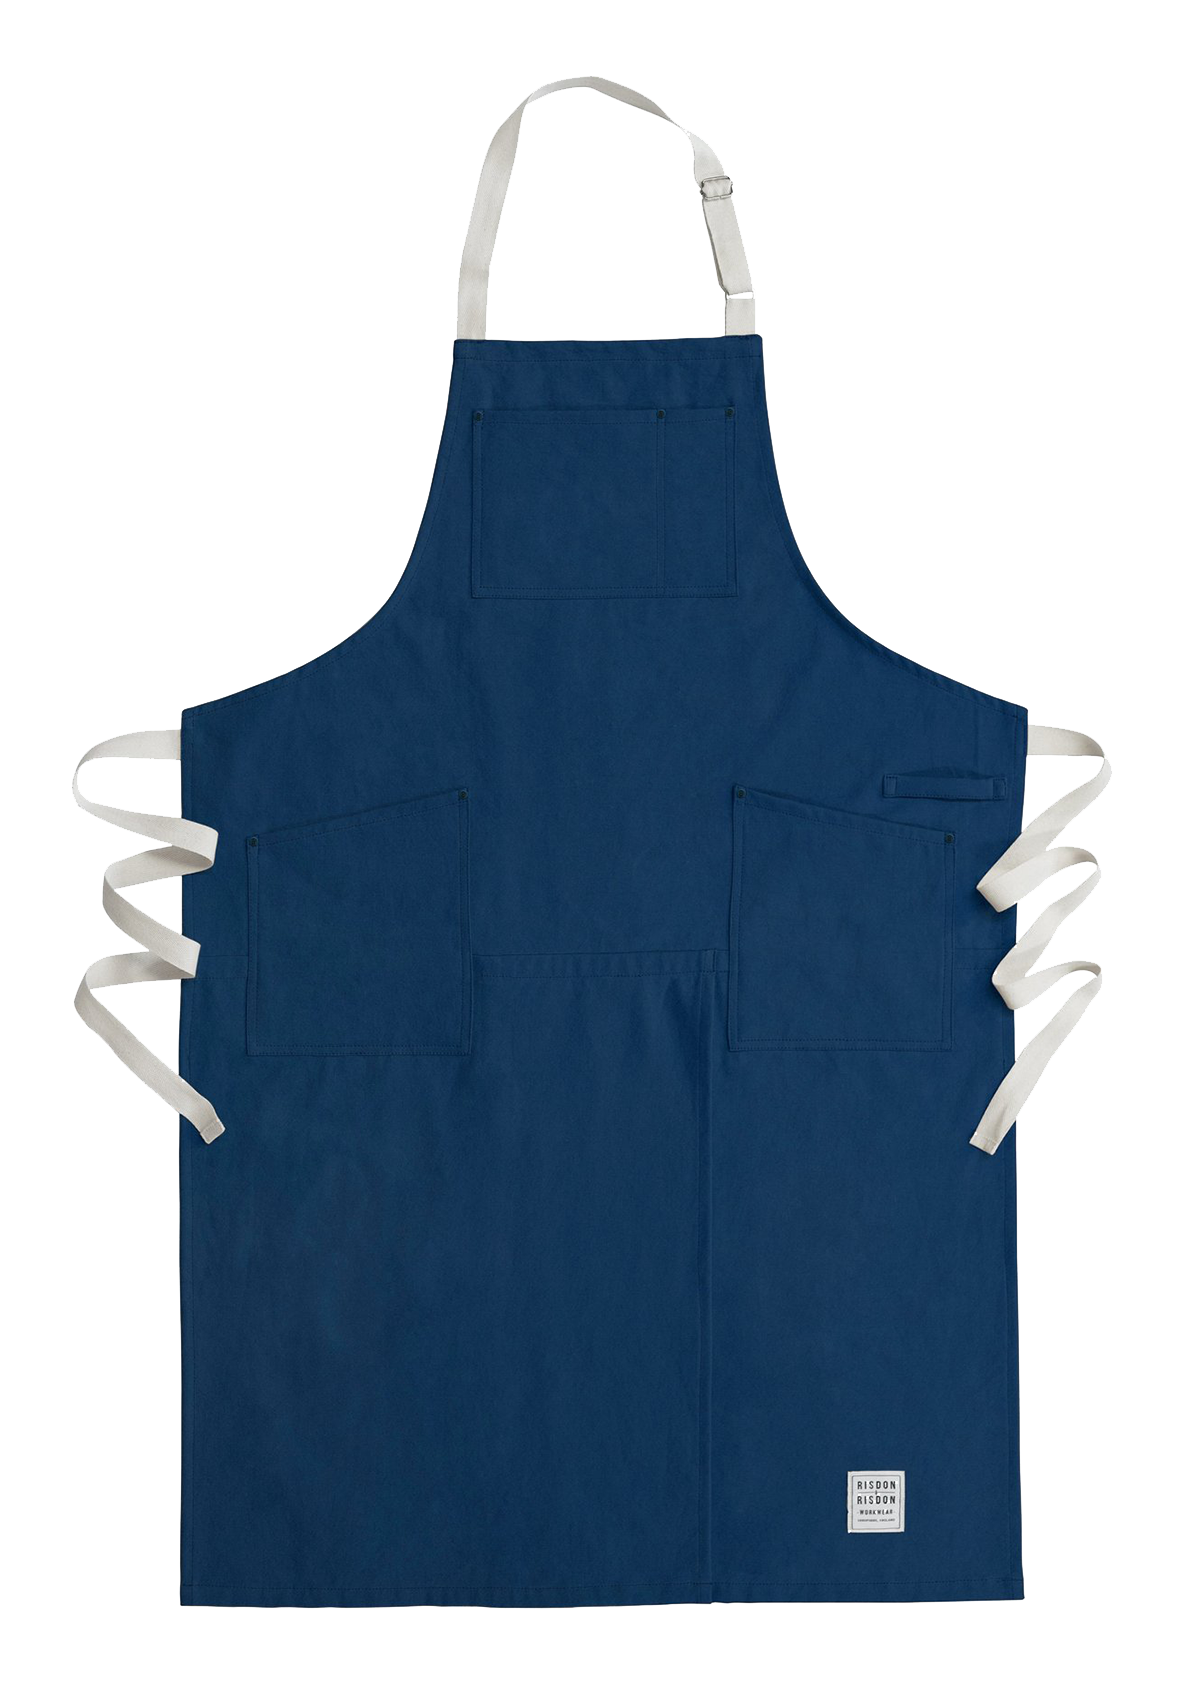 Handcrafted Potter's Apron Canvas Split-Leg With Pockets Unisex